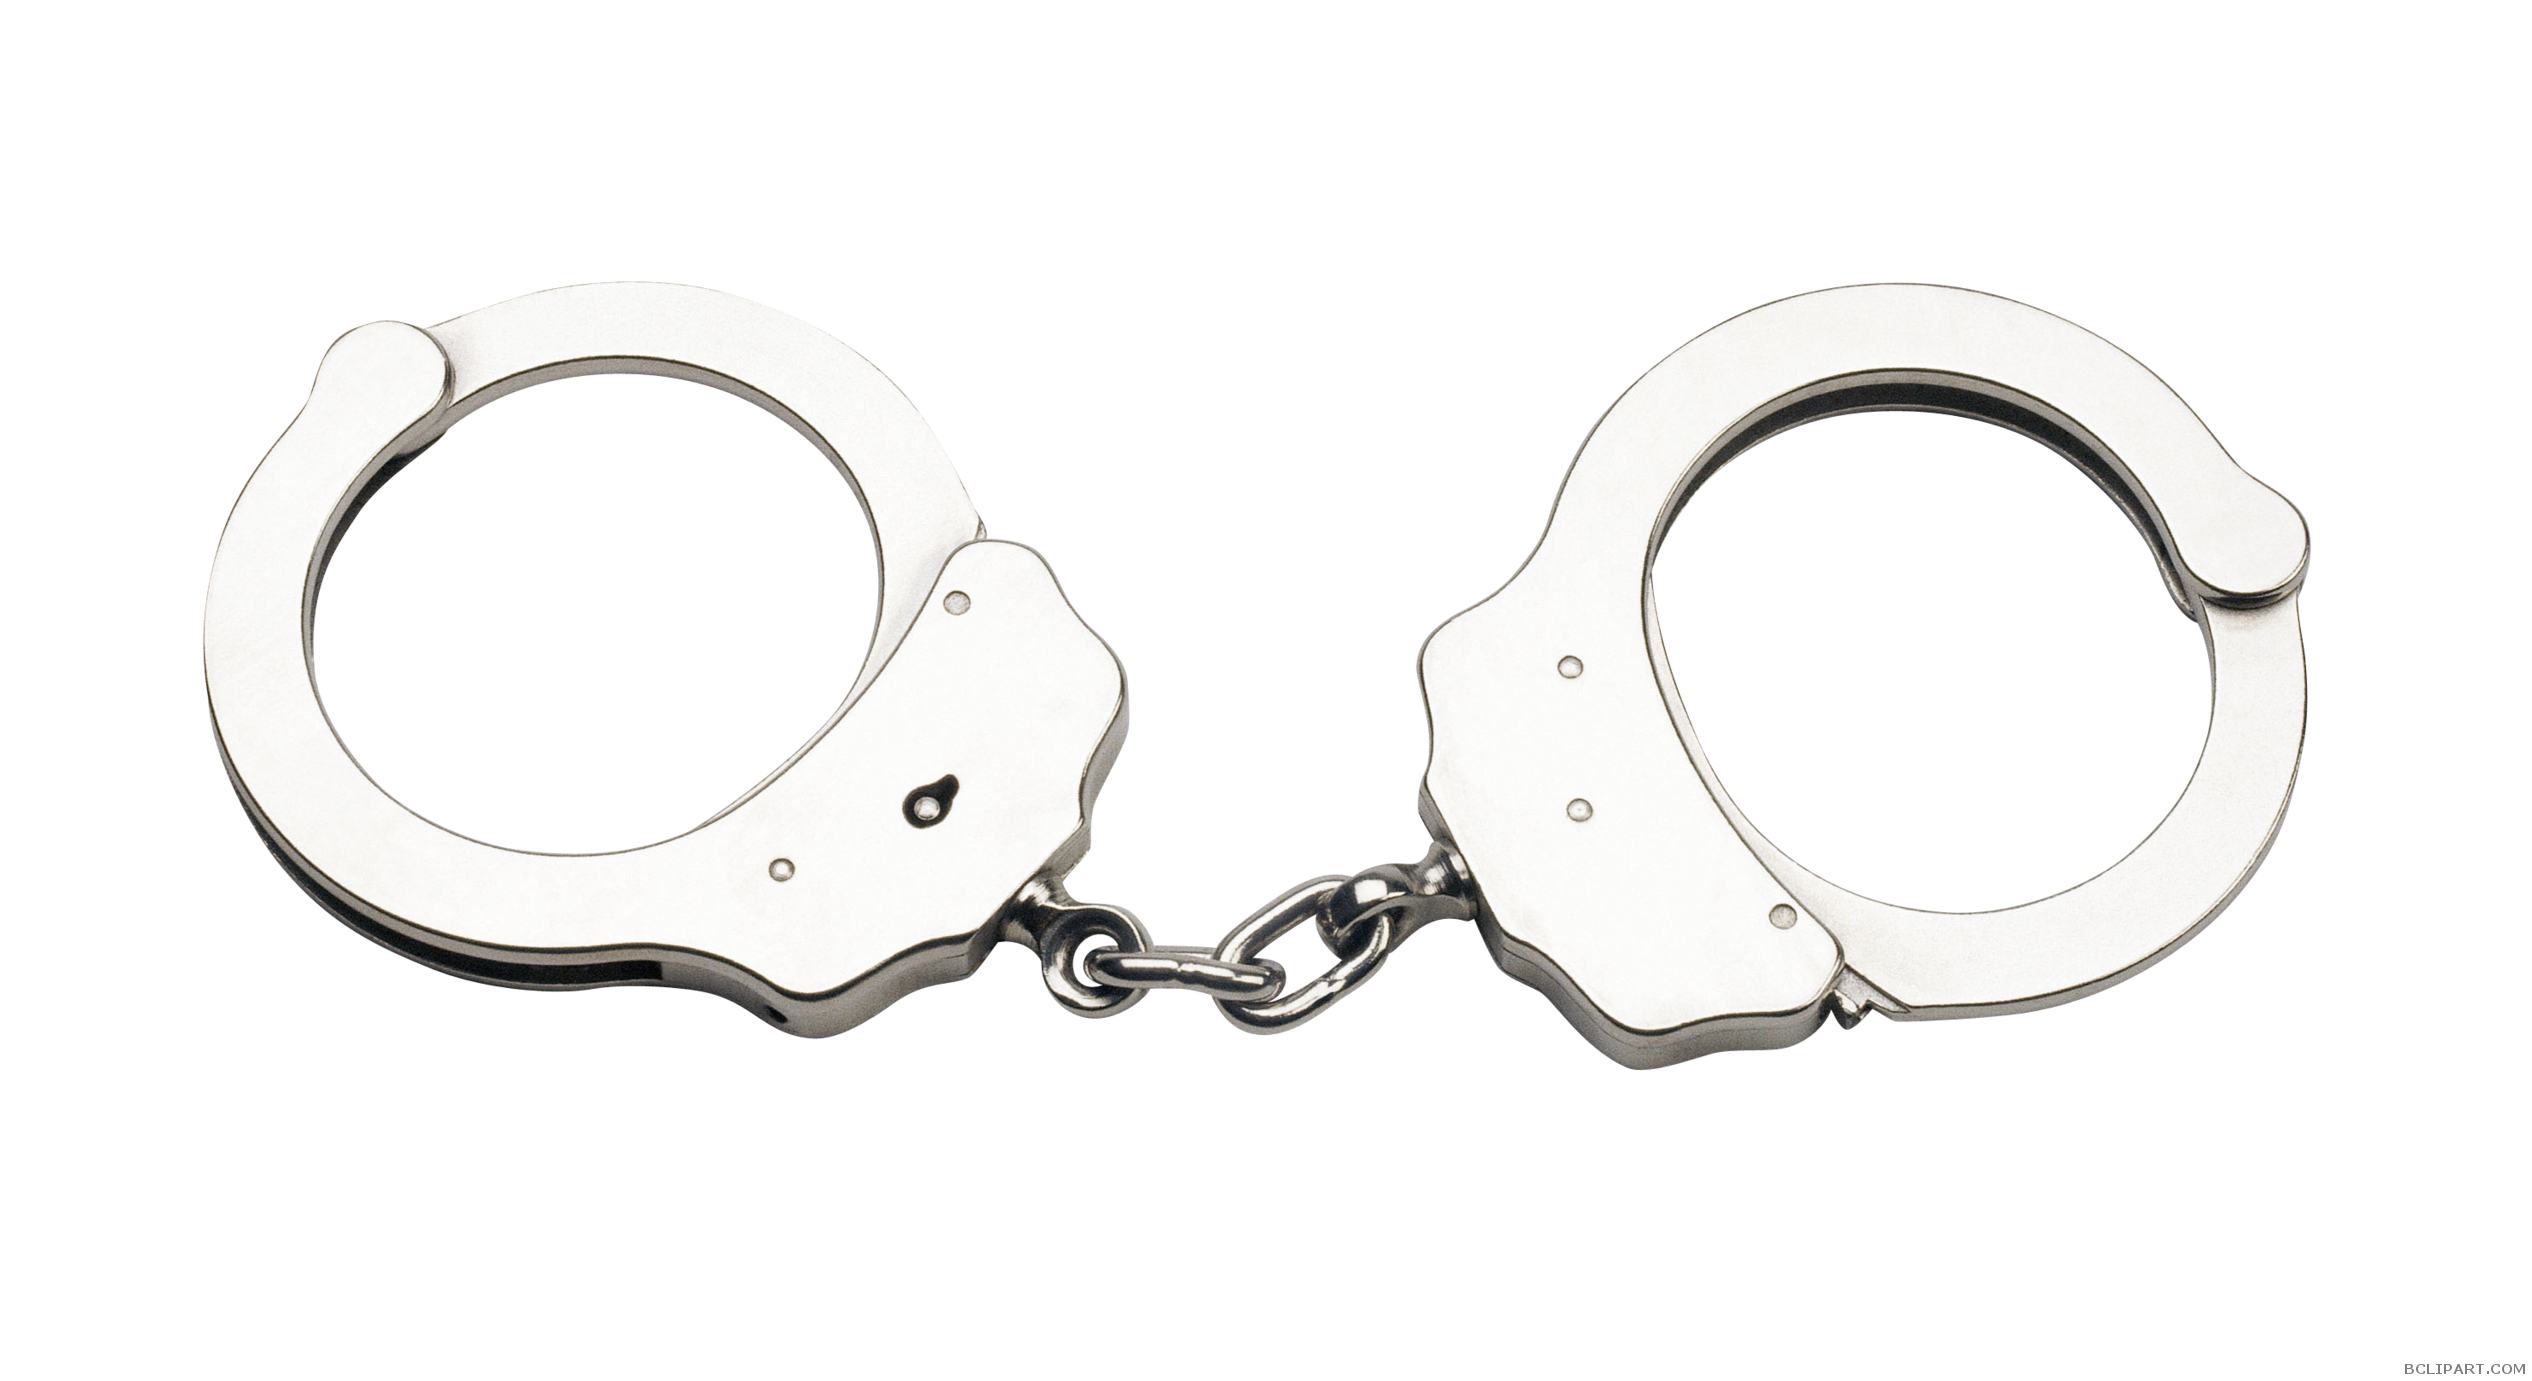 Bclipart tools free images. Handcuffs clipart blue